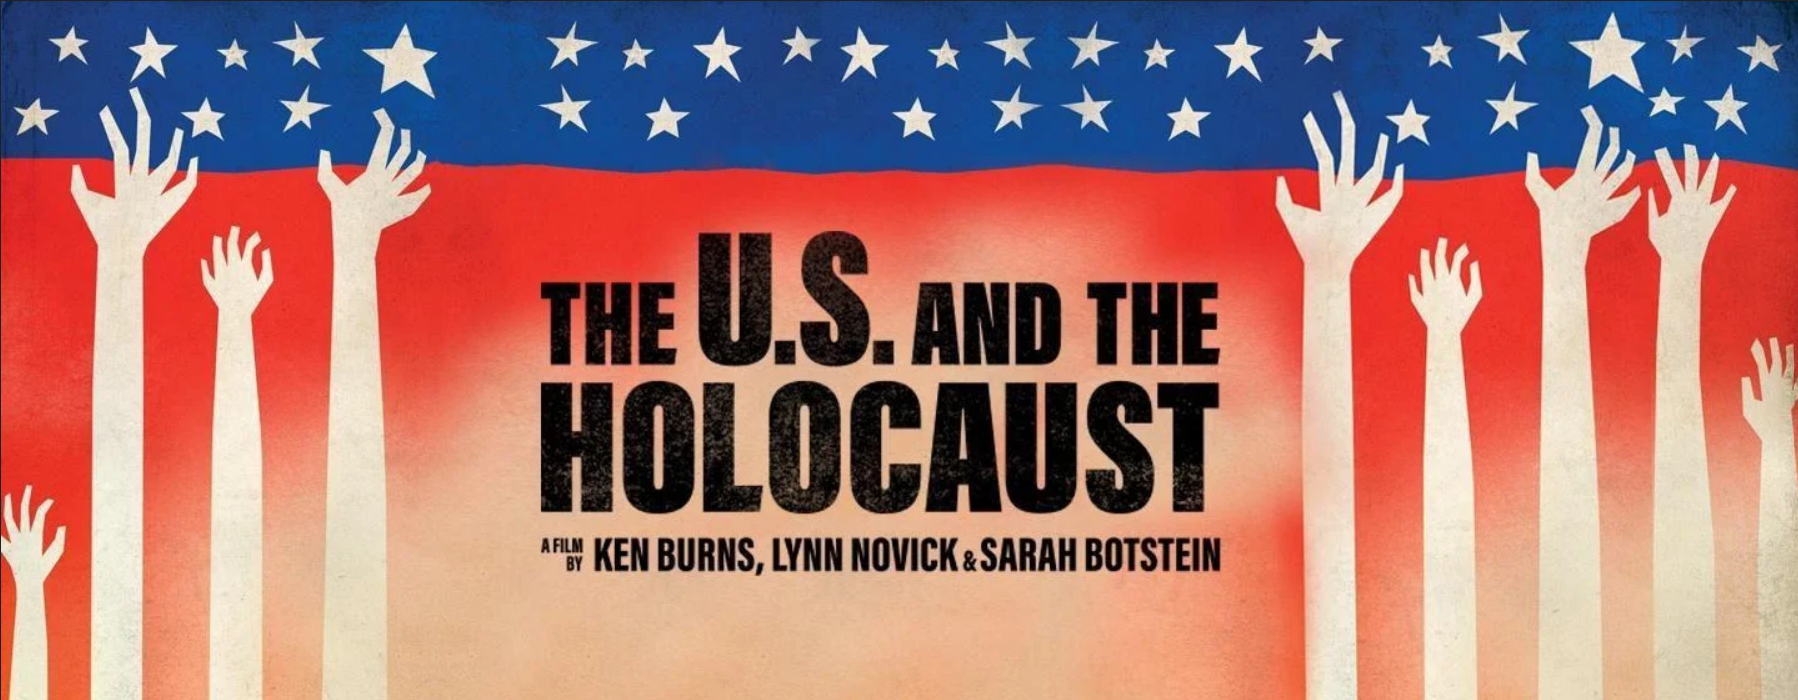 Banner image for the US and the Holocaust. The top has a blue border with white stars with red faded to white at the bottom. Silhouettes of hands are reaching up form the bottom of the image.